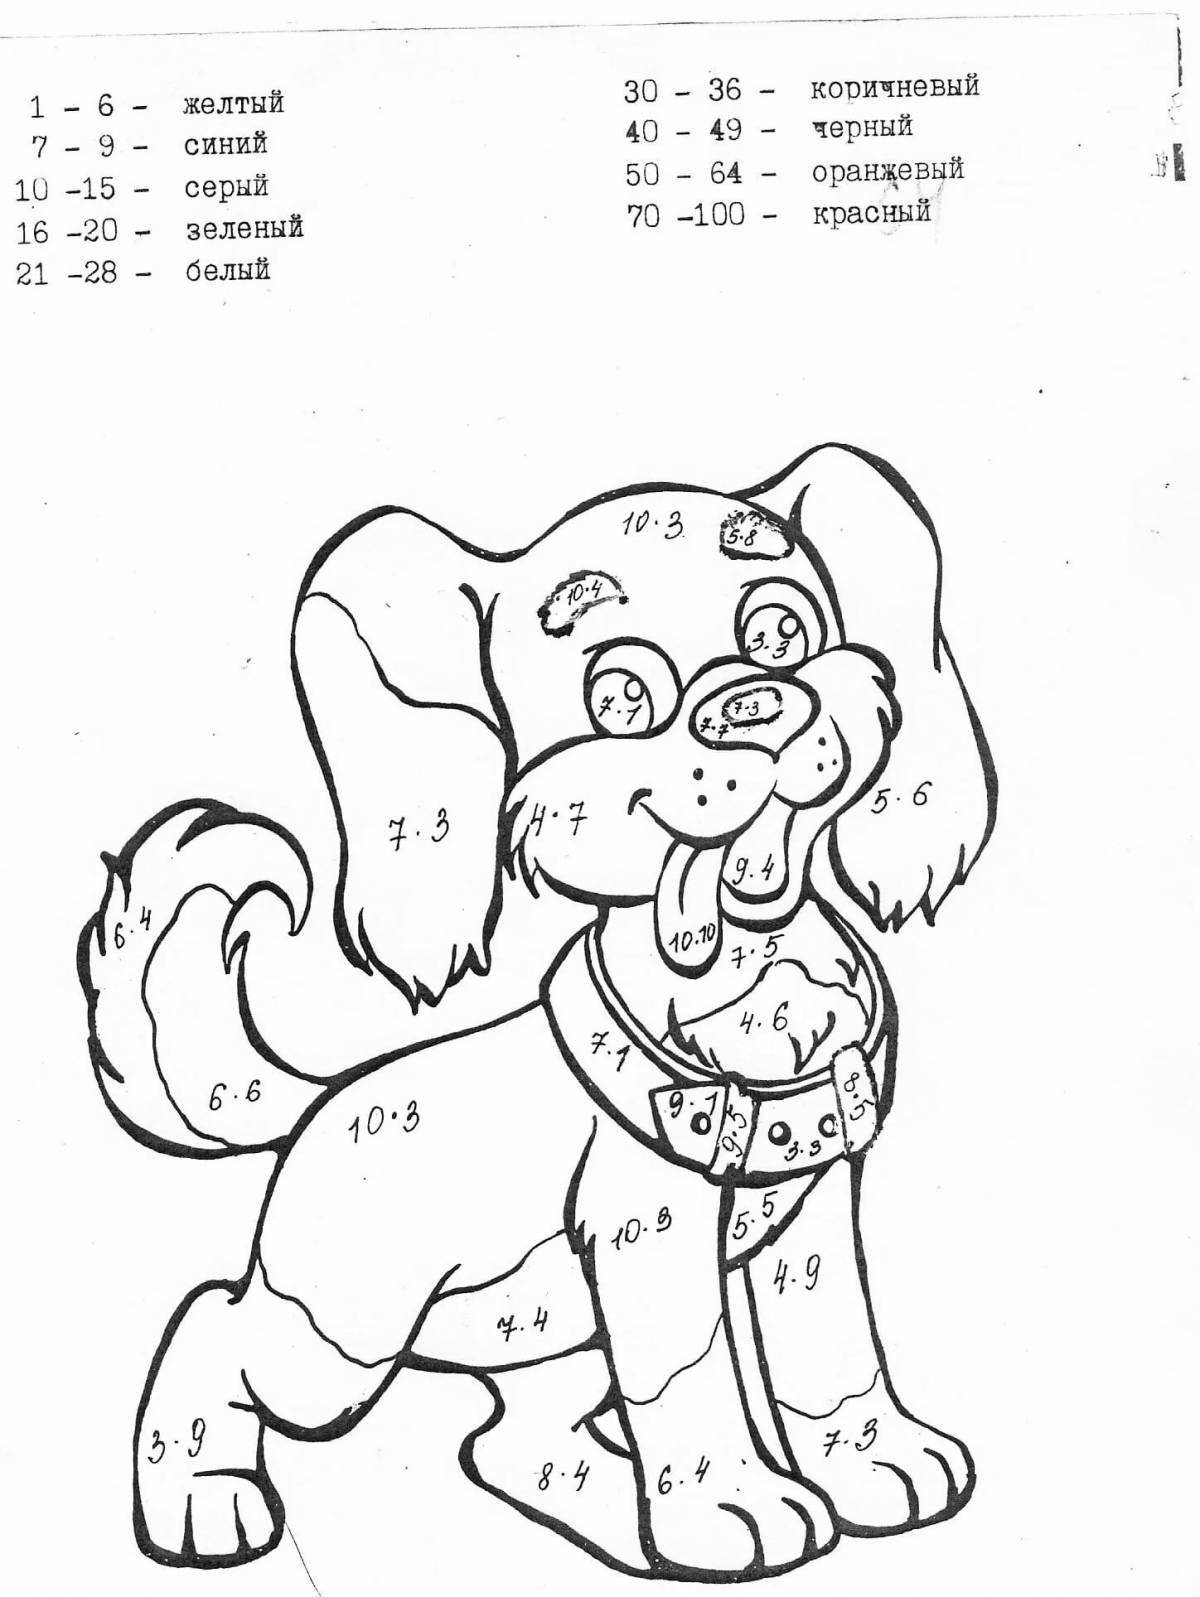 Dog-friendly coloring book